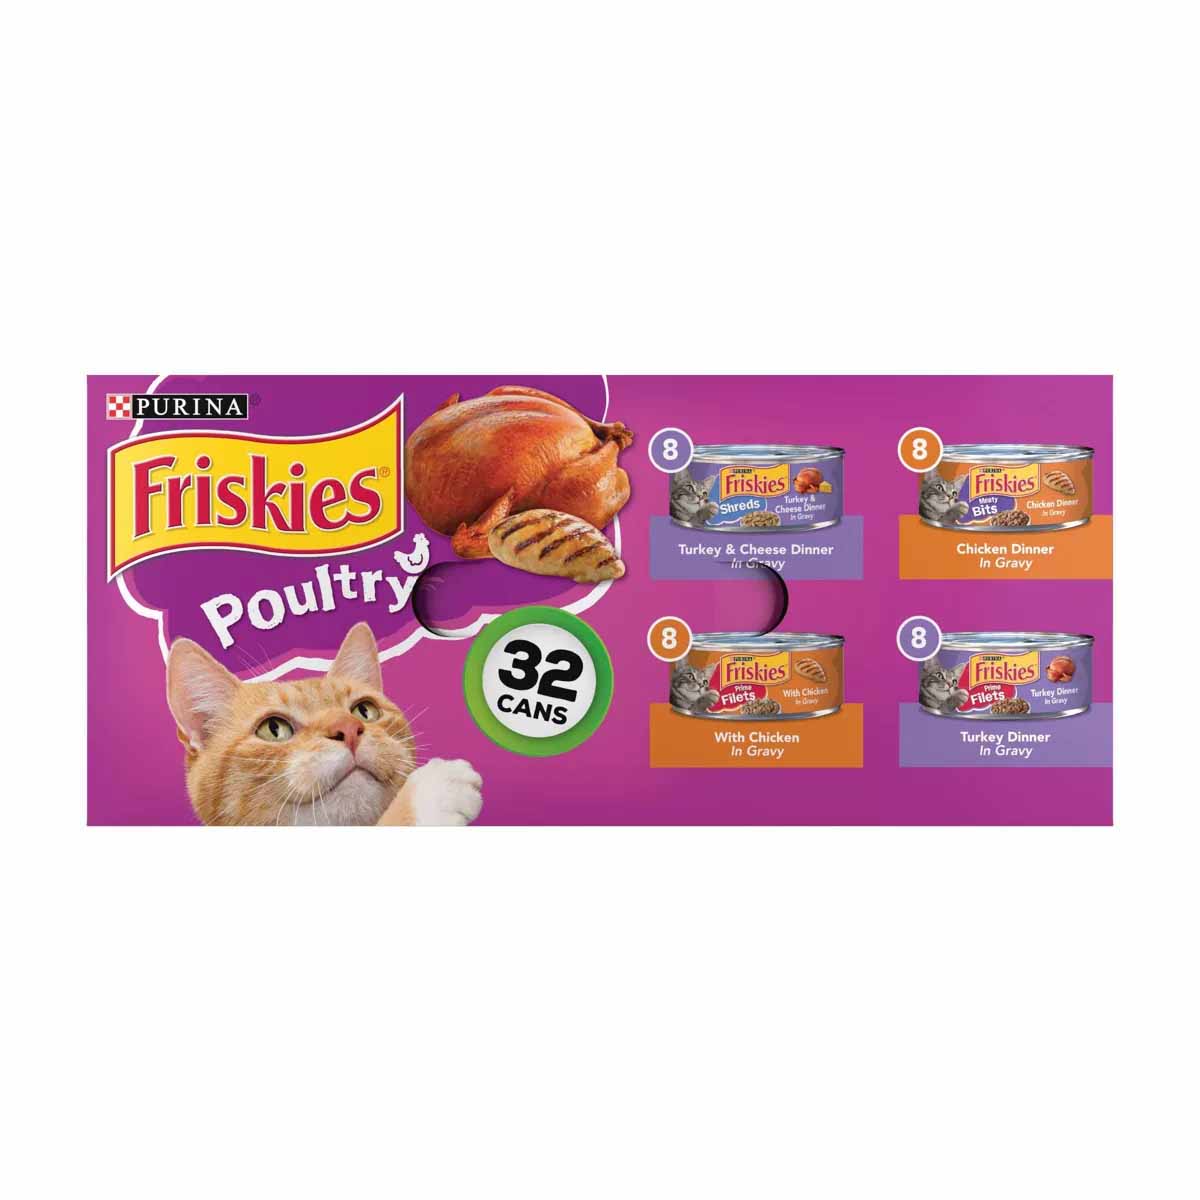 Purina Friskies Shreds, Meaty Bits & Prime Filets with Chicken, Turkey, and Cheese Flavor in purple box